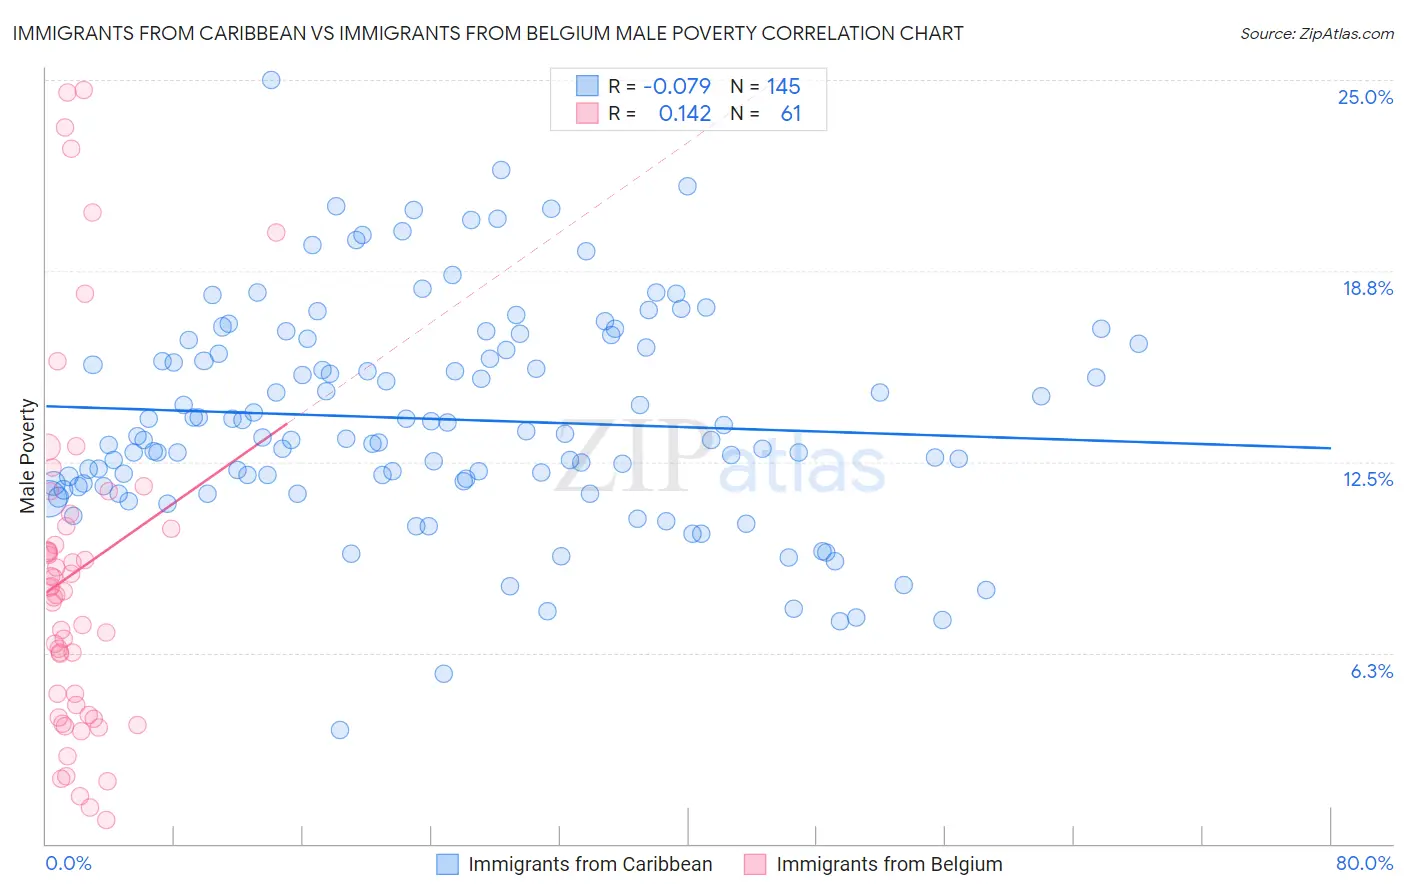 Immigrants from Caribbean vs Immigrants from Belgium Male Poverty